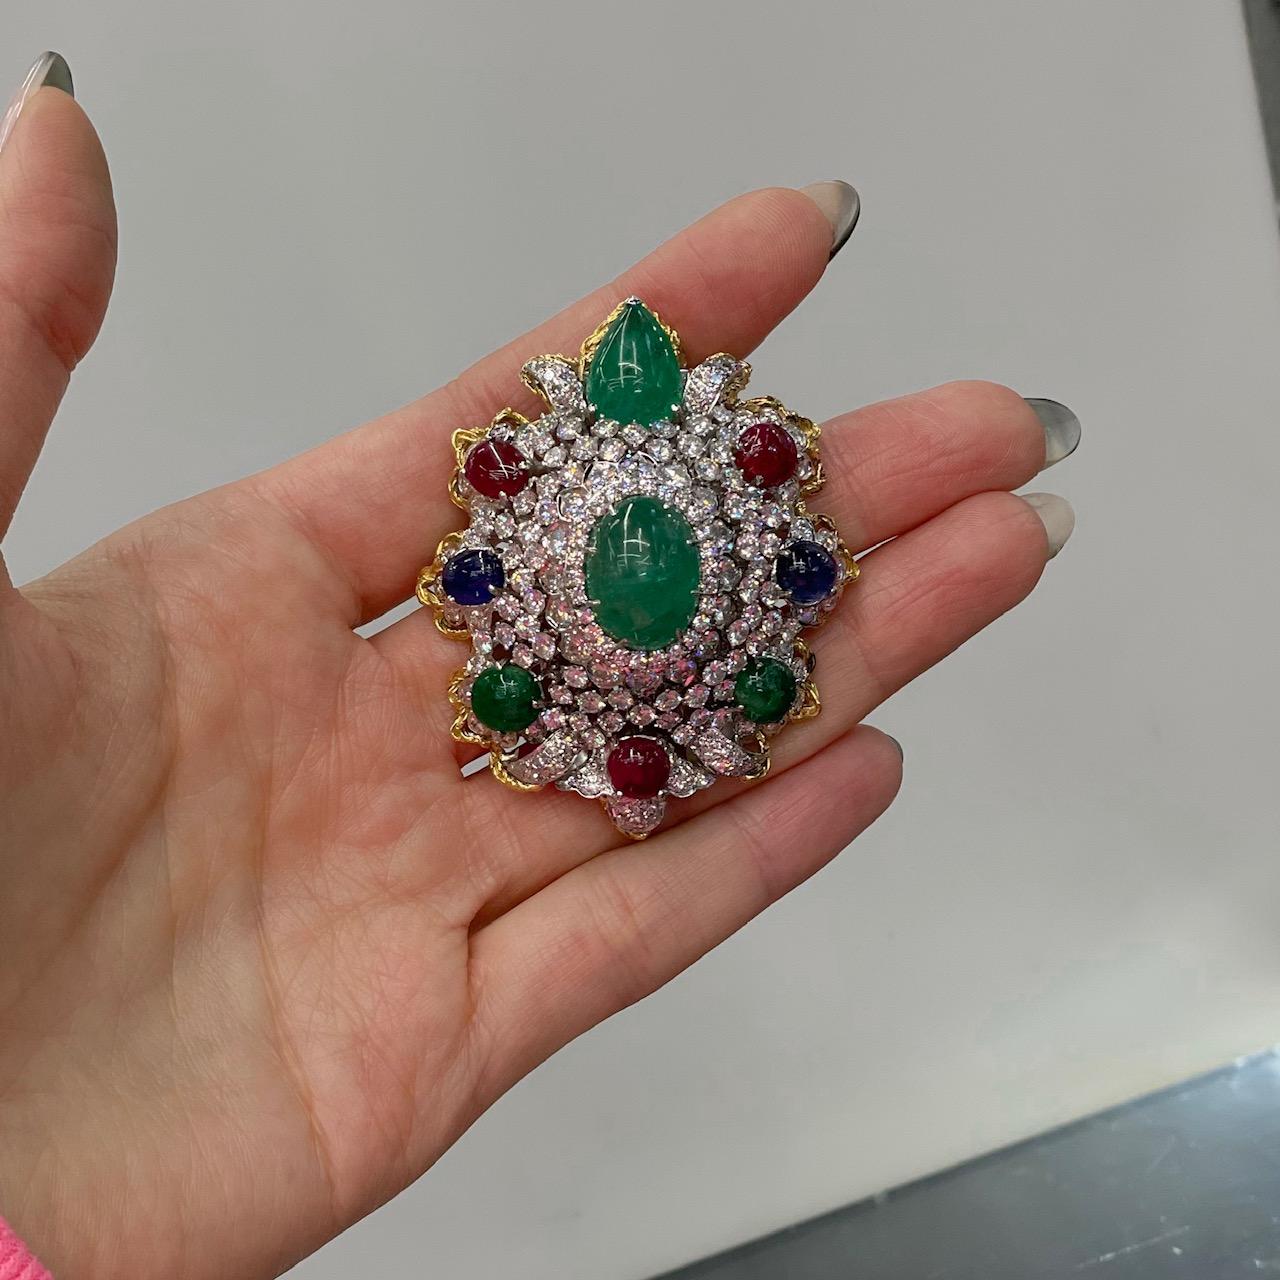 Diamond And Gemstones Heraldic Brooch from 1970's In Excellent Condition For Sale In New York, NY